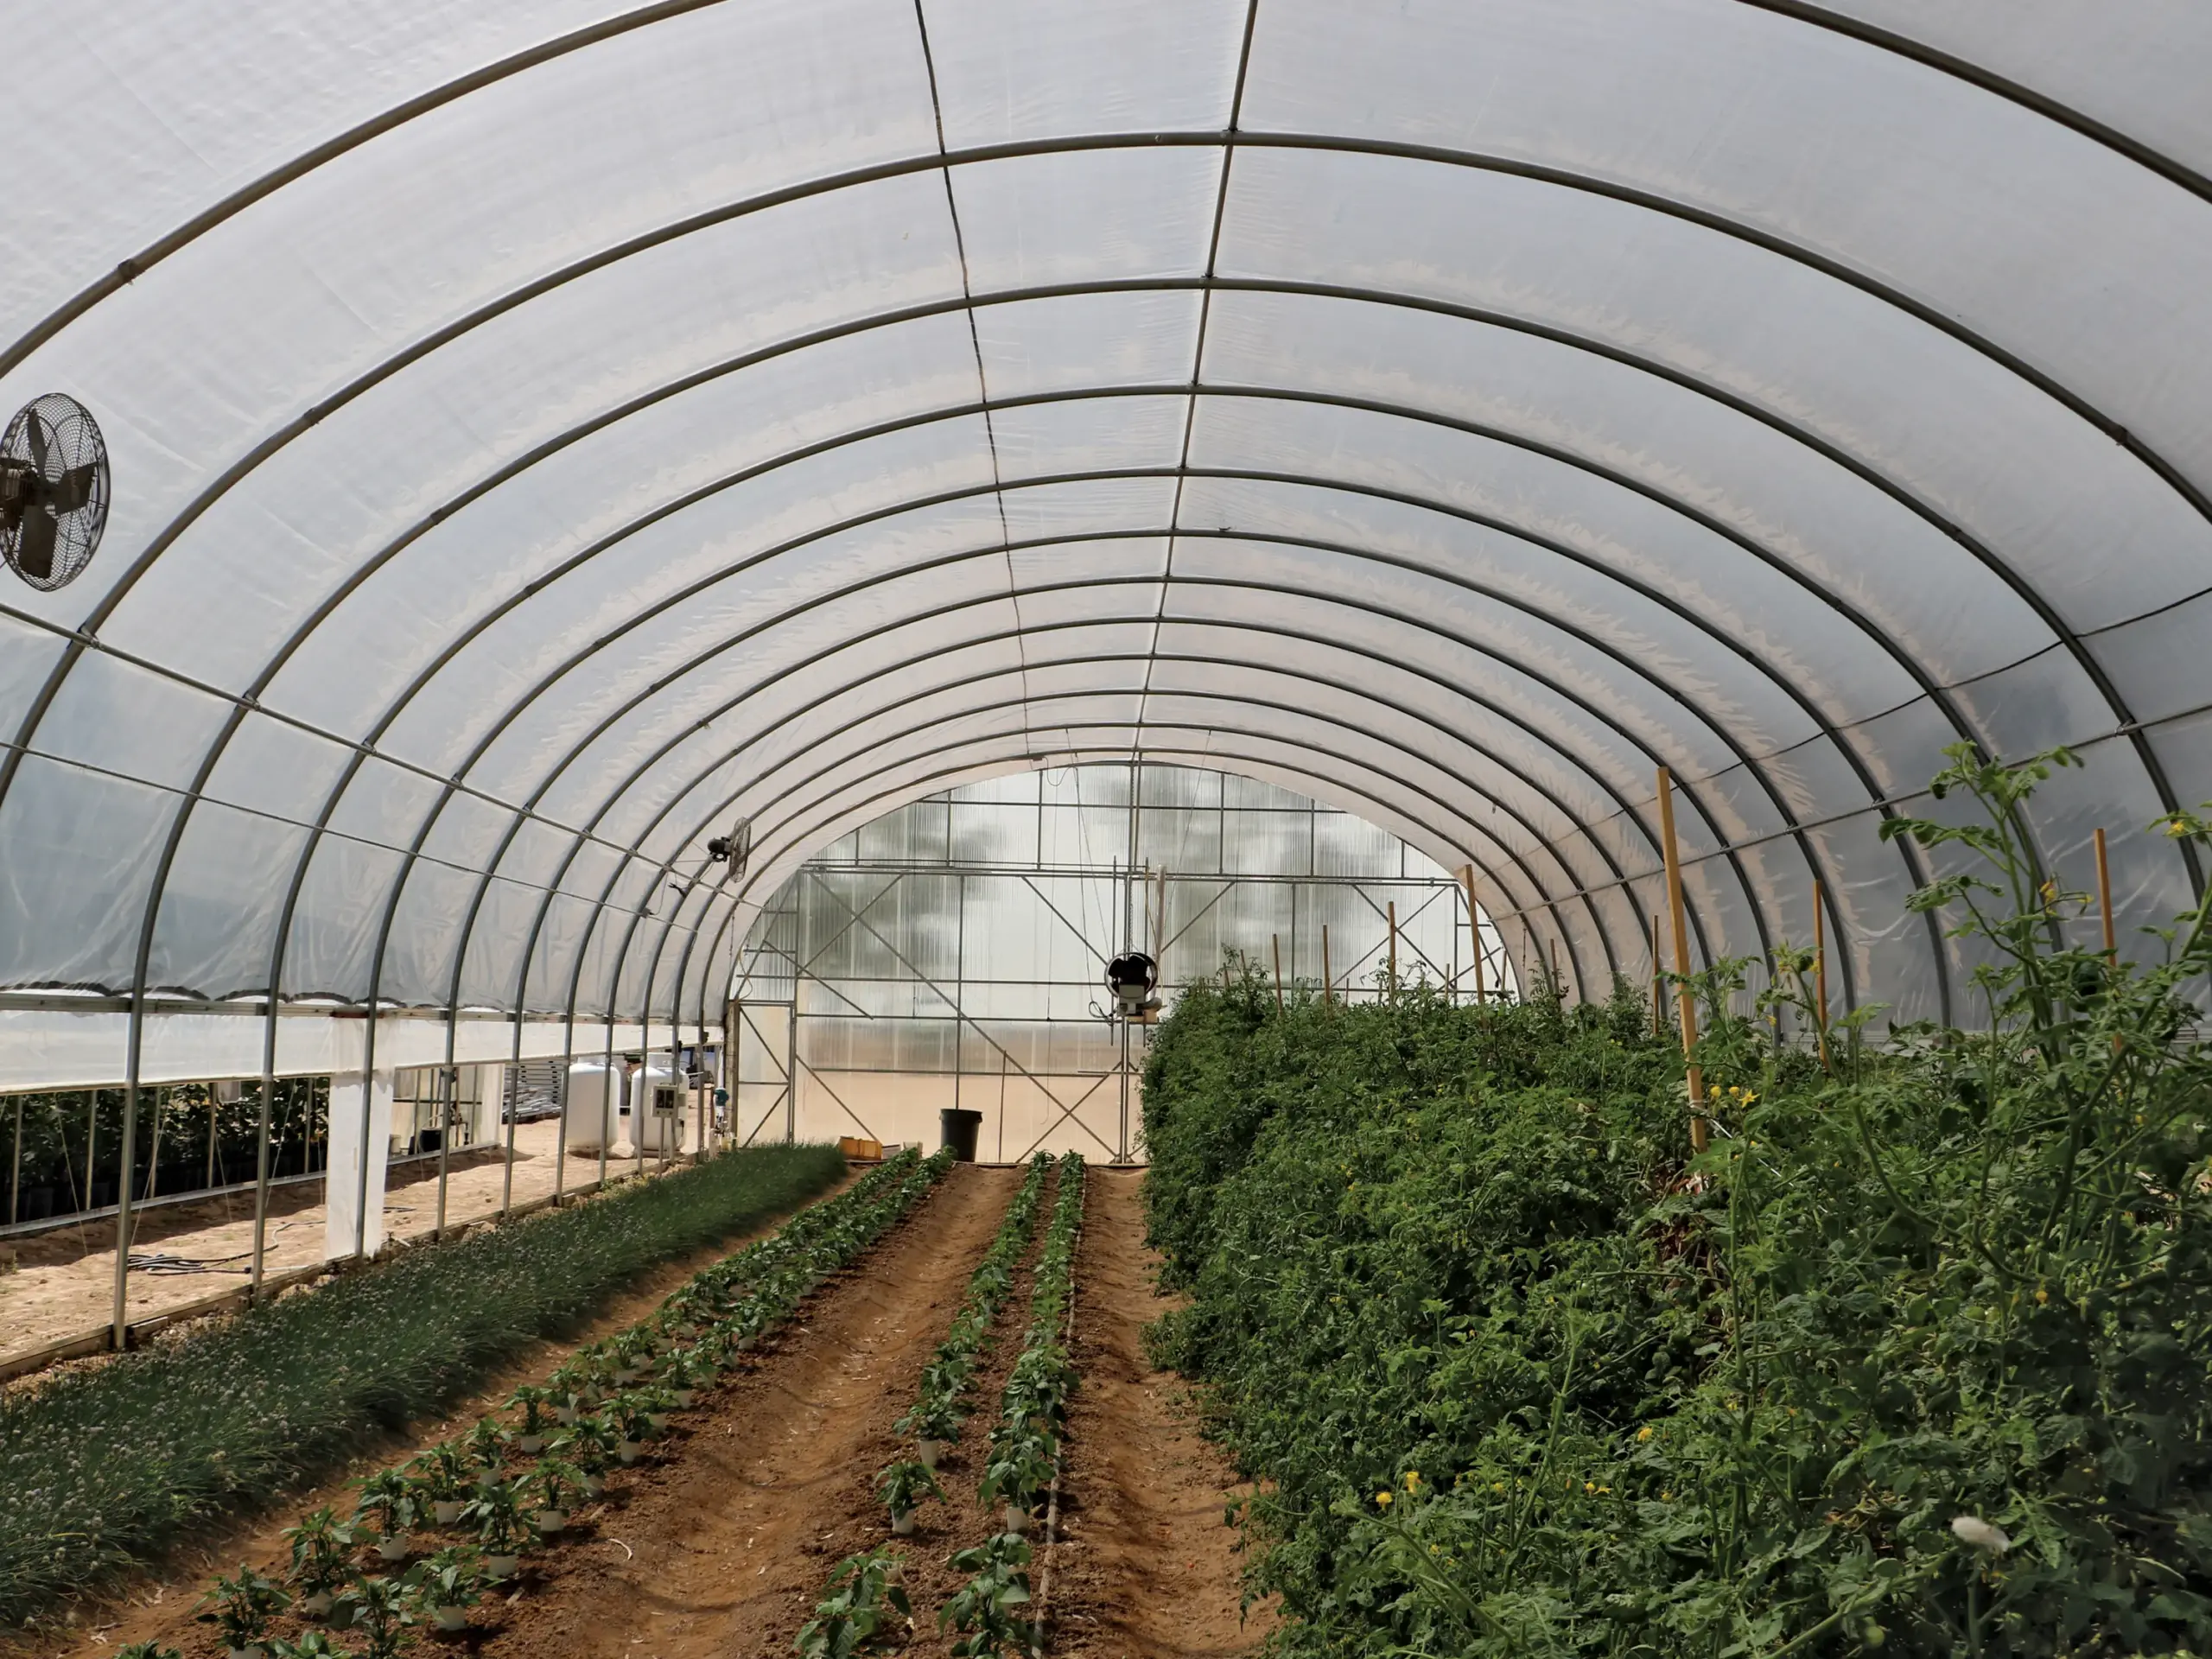 interior of hoop house with crops growing in ground